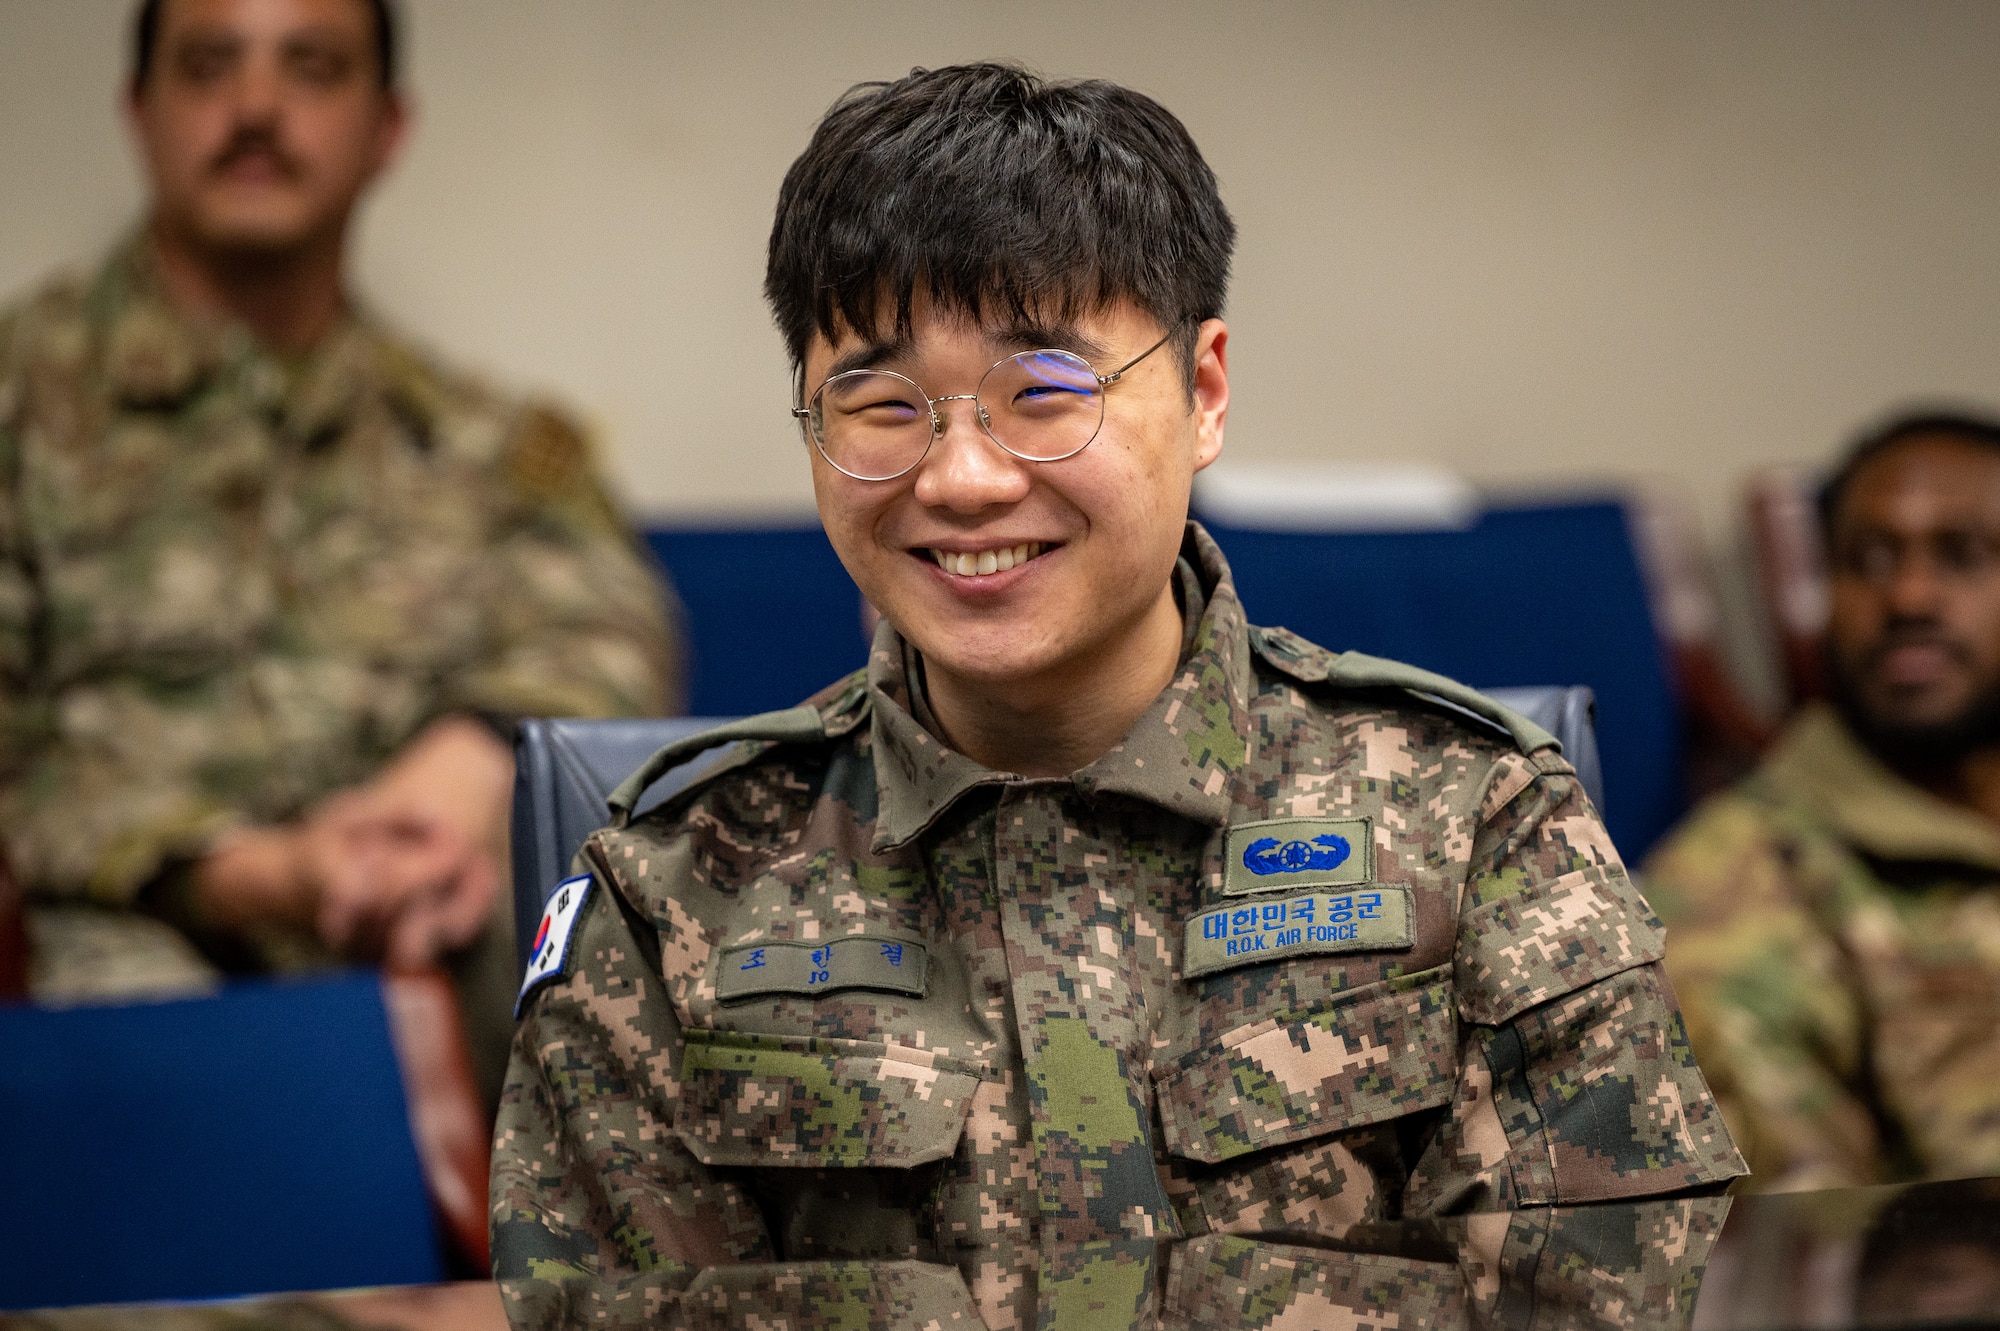 Republic of Korea Air Force Tech. Sgt. Jo, Han Gyeol, a ROKAF civil engineer, smiles as he listens to a presentation during a Noncommissioned Officer Summit at Osan Air Base, Republic of Korea, Feb. 22, 2024. The summit paired 51st Fighter Wing Airmen with their ROKAF counterparts in similar career fields to foster a mutual understanding of each other's operational tactics in both peacetime and war. (U.S. Air Force photo by Staff Sgt. Thomas Sjoberg)